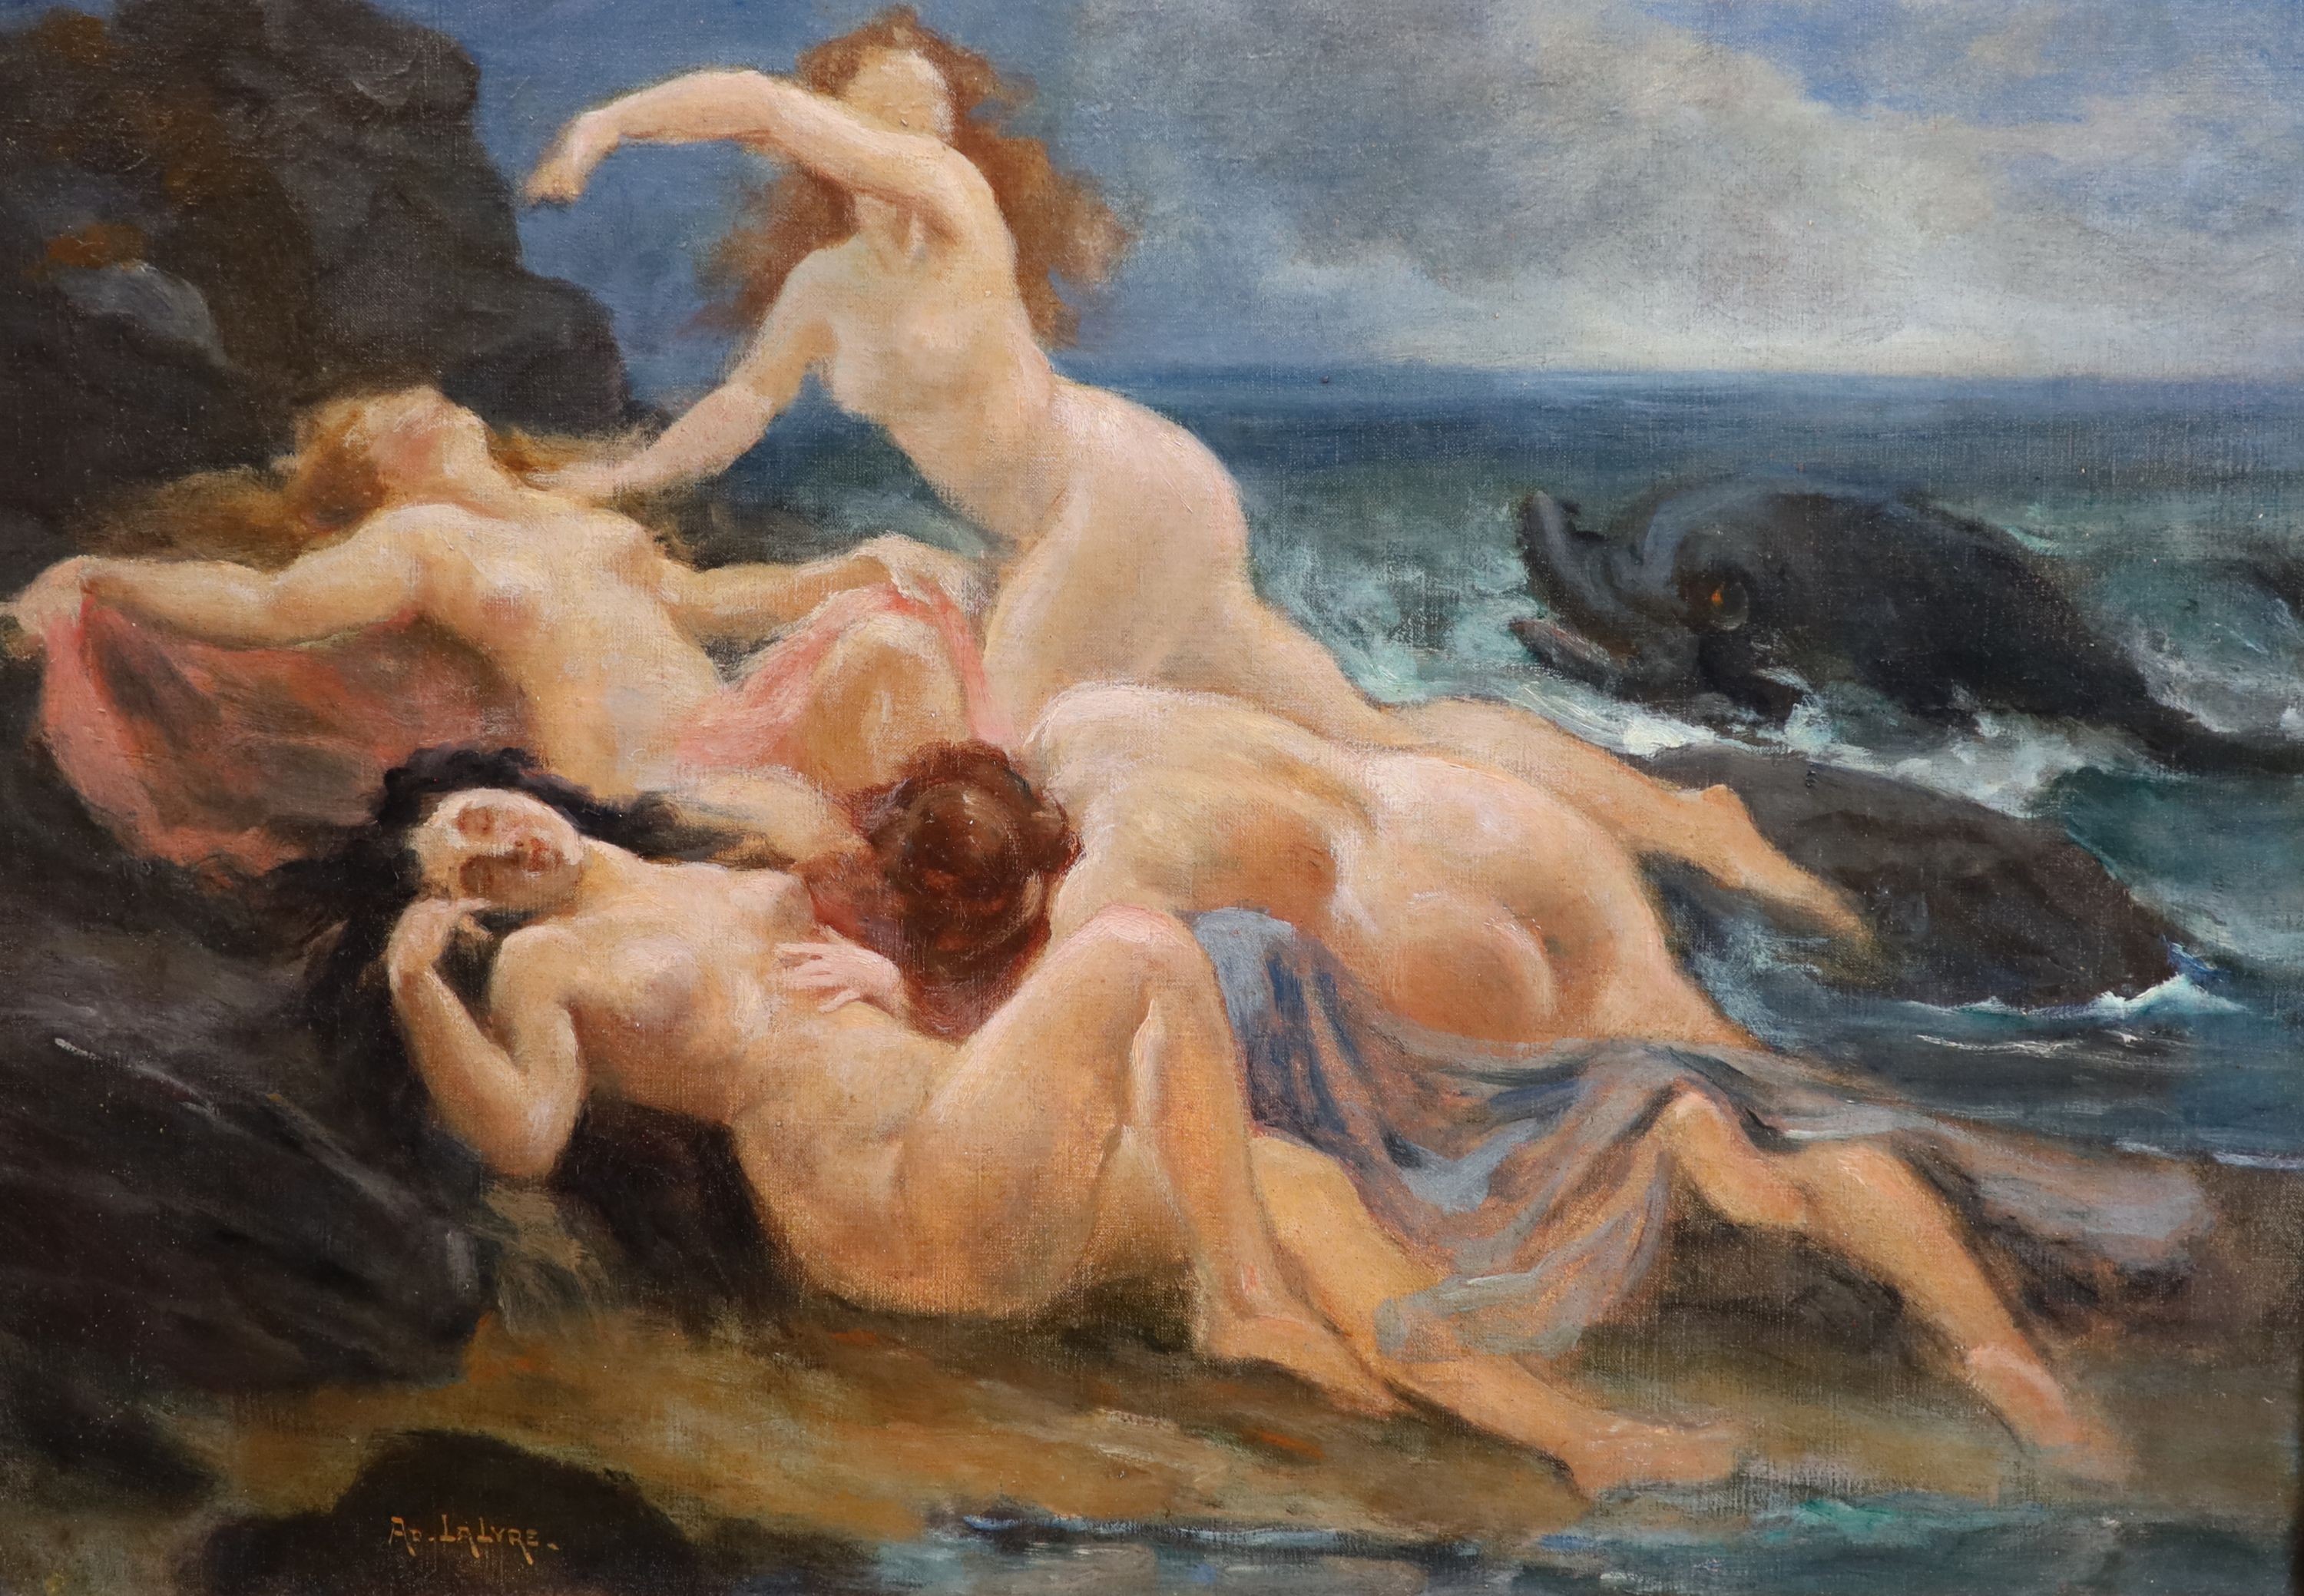 Adolphe Lalyre (French, 1848-1933), Sirens and dolphin beside rocks, oil on canvas, 55 x 79cm